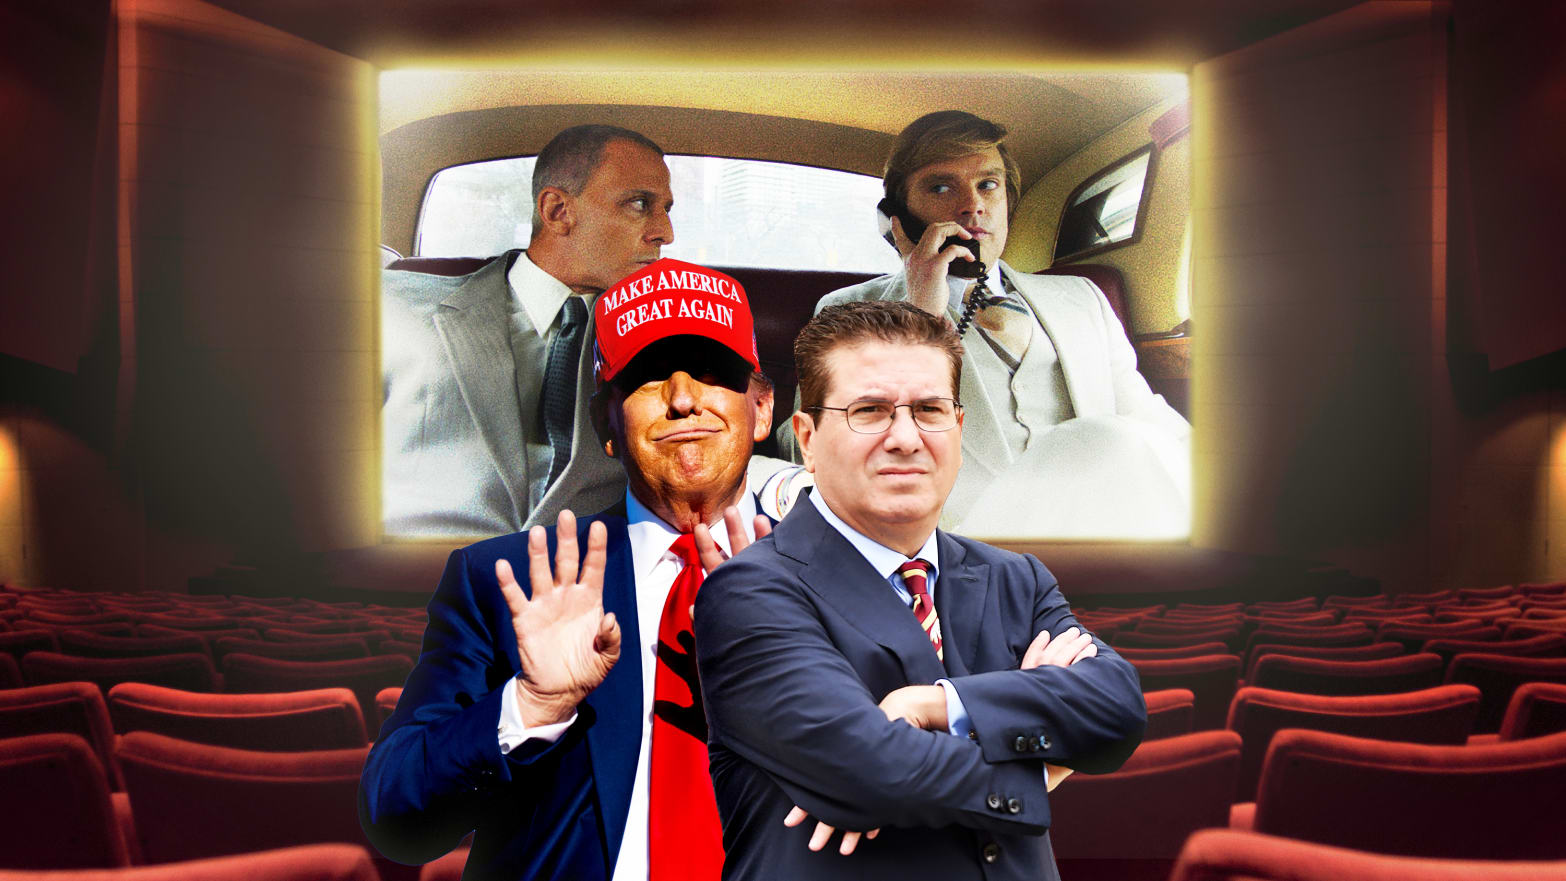 A photo illustration of Donald Trump, Dan Snyder, and The Apprentice film in a movie theater.